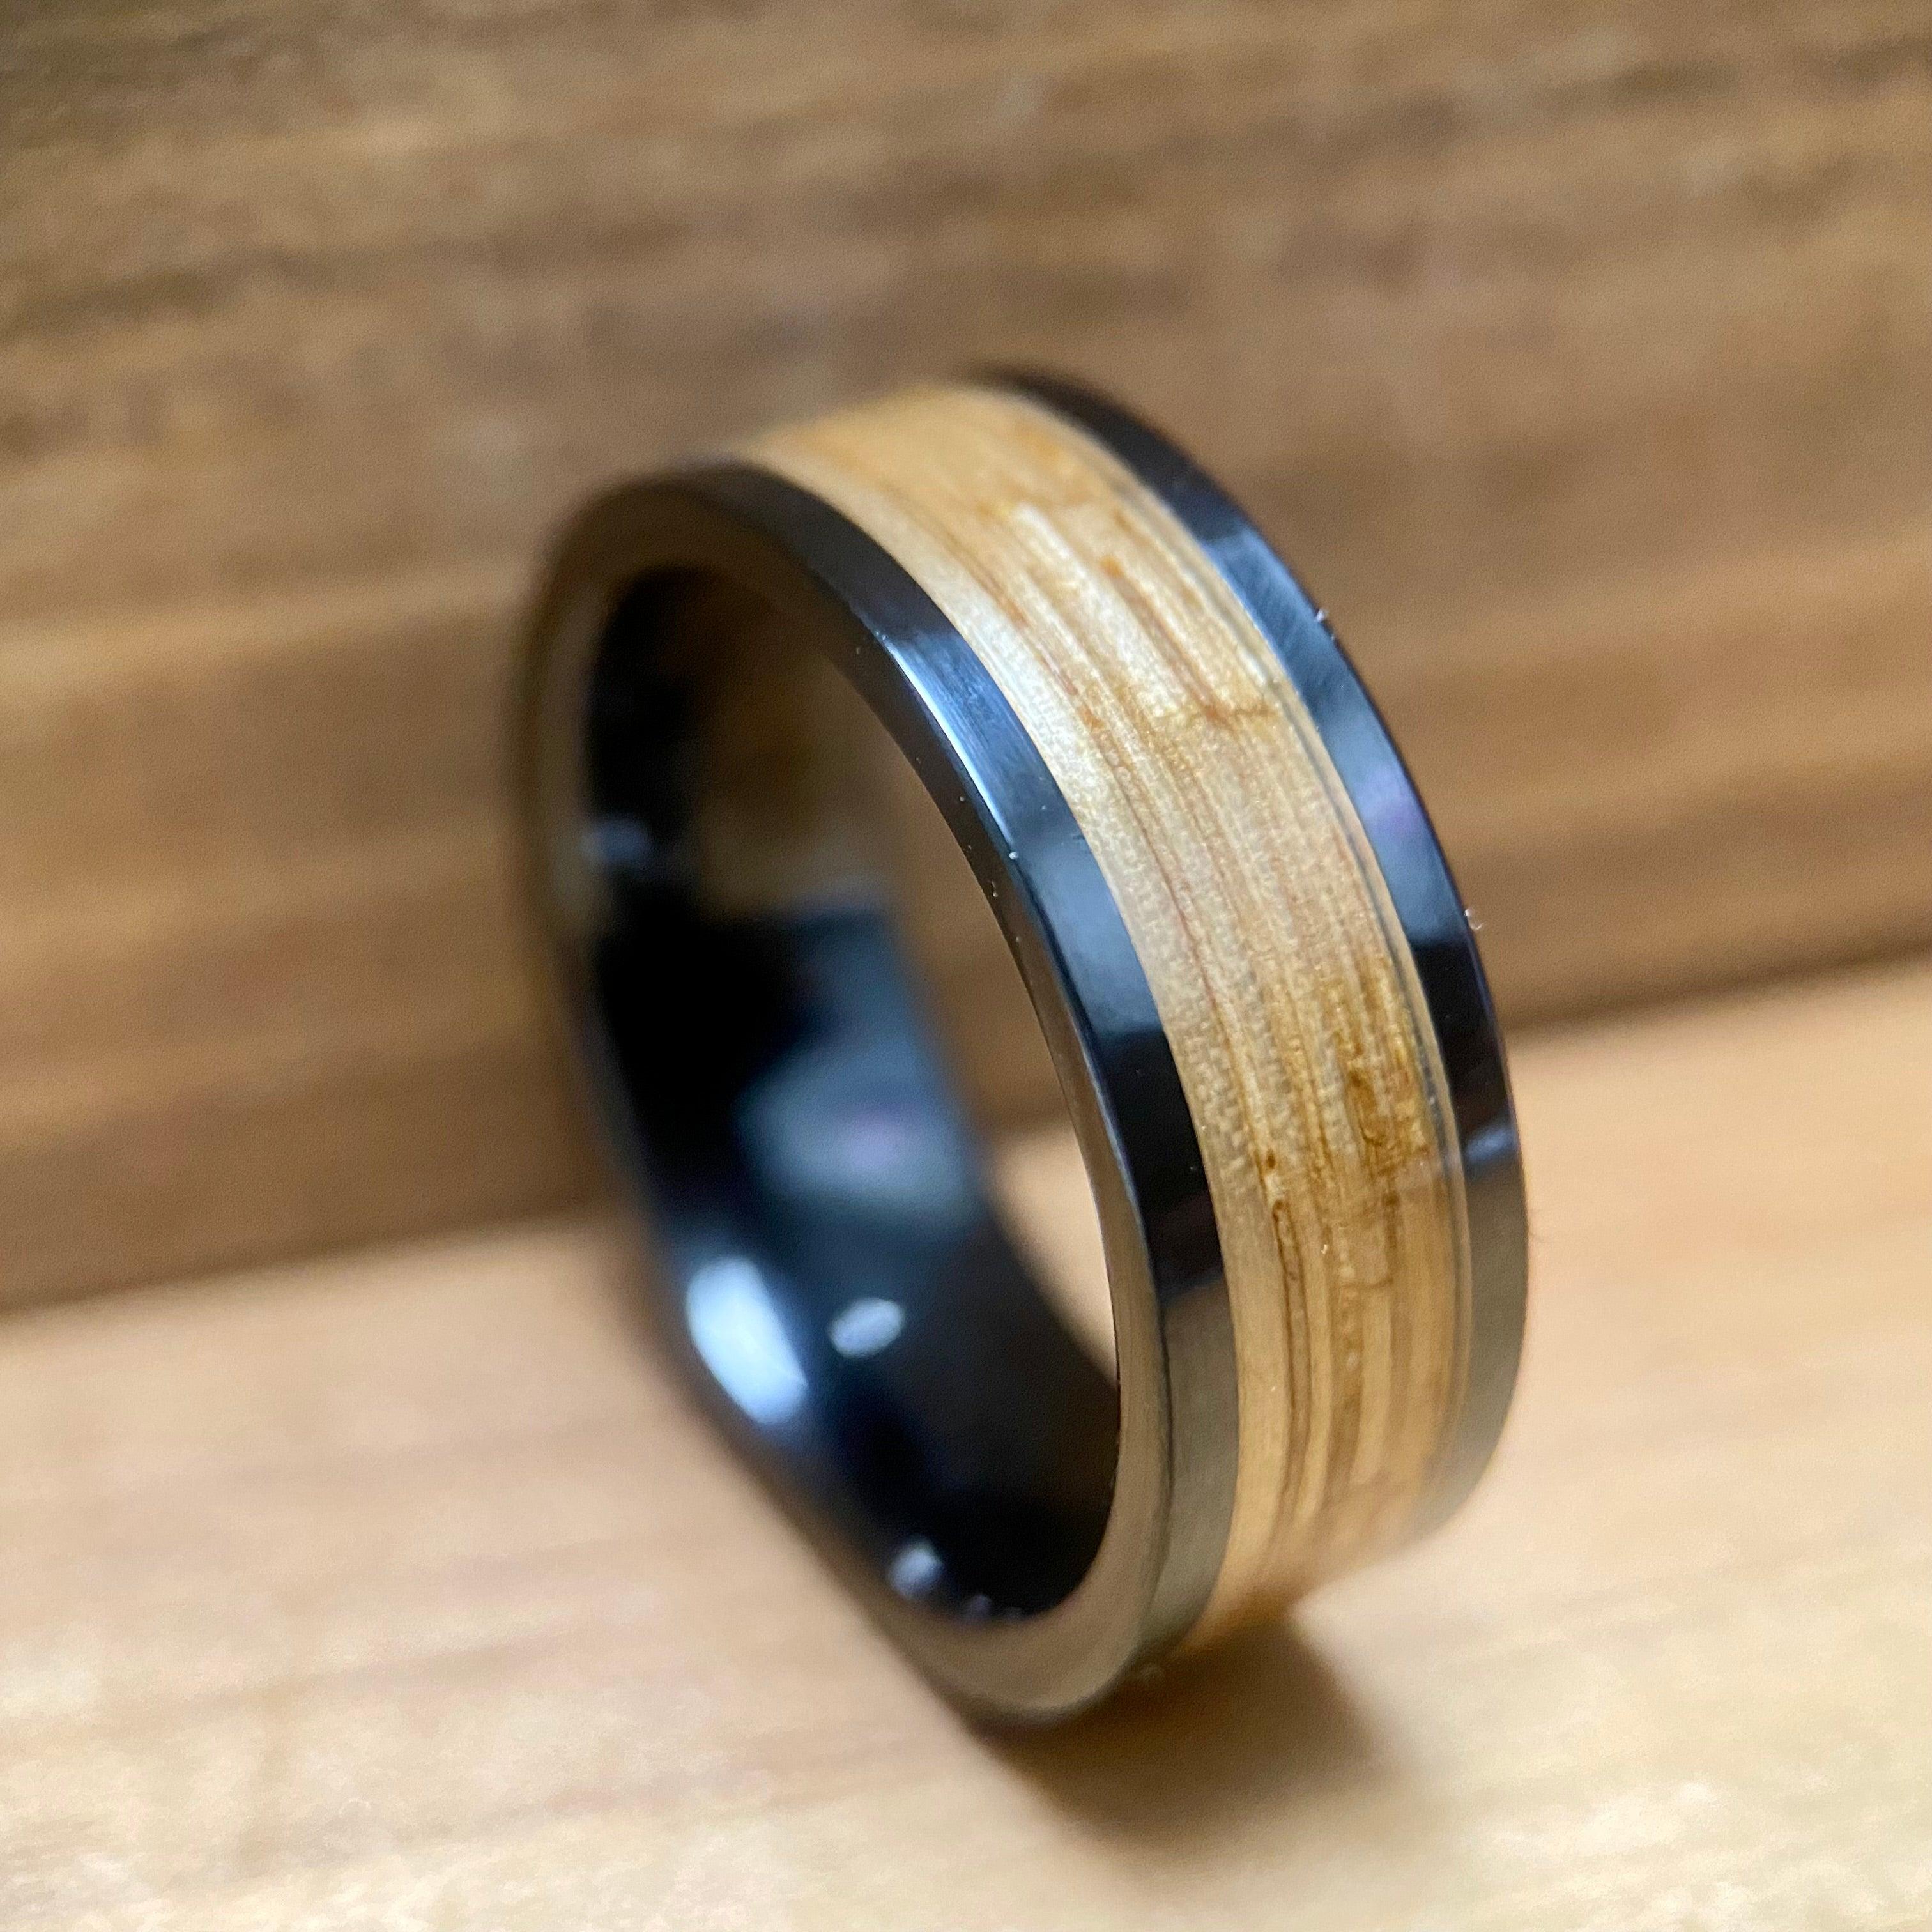 BW James Jewelers ALT Wedding Band “Old Ironsides" 100% USA Made Black Ceramic Ring With Wood From USS Constitution Ship